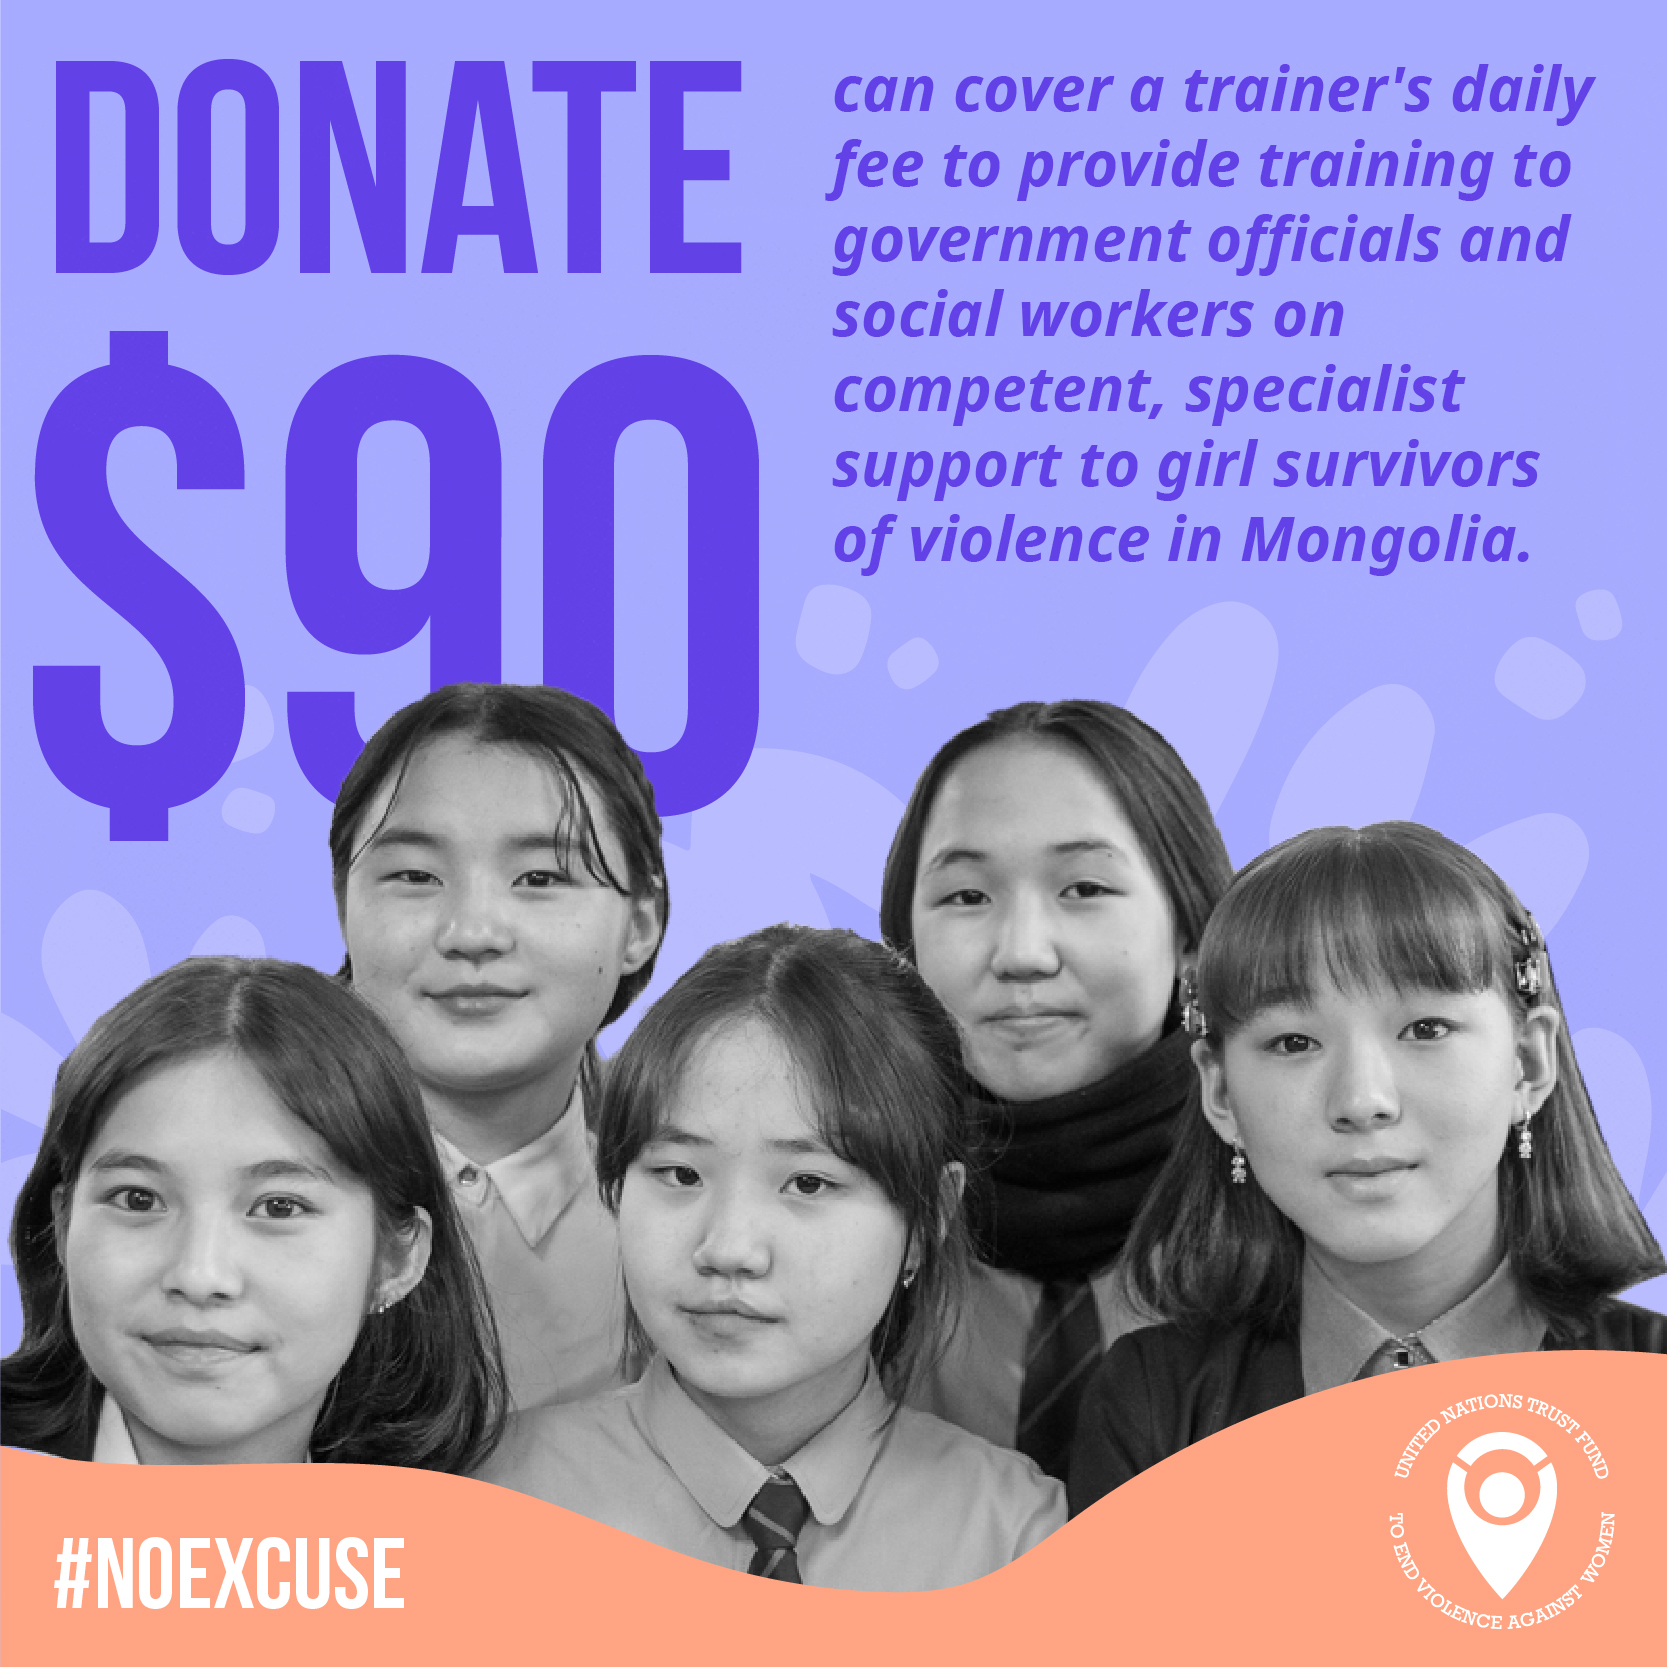 Donate USD90 can cover a trainer's daily fee to provide training to government officials and social workers on competent, specialist support to girl survivors of violence in Mongolia